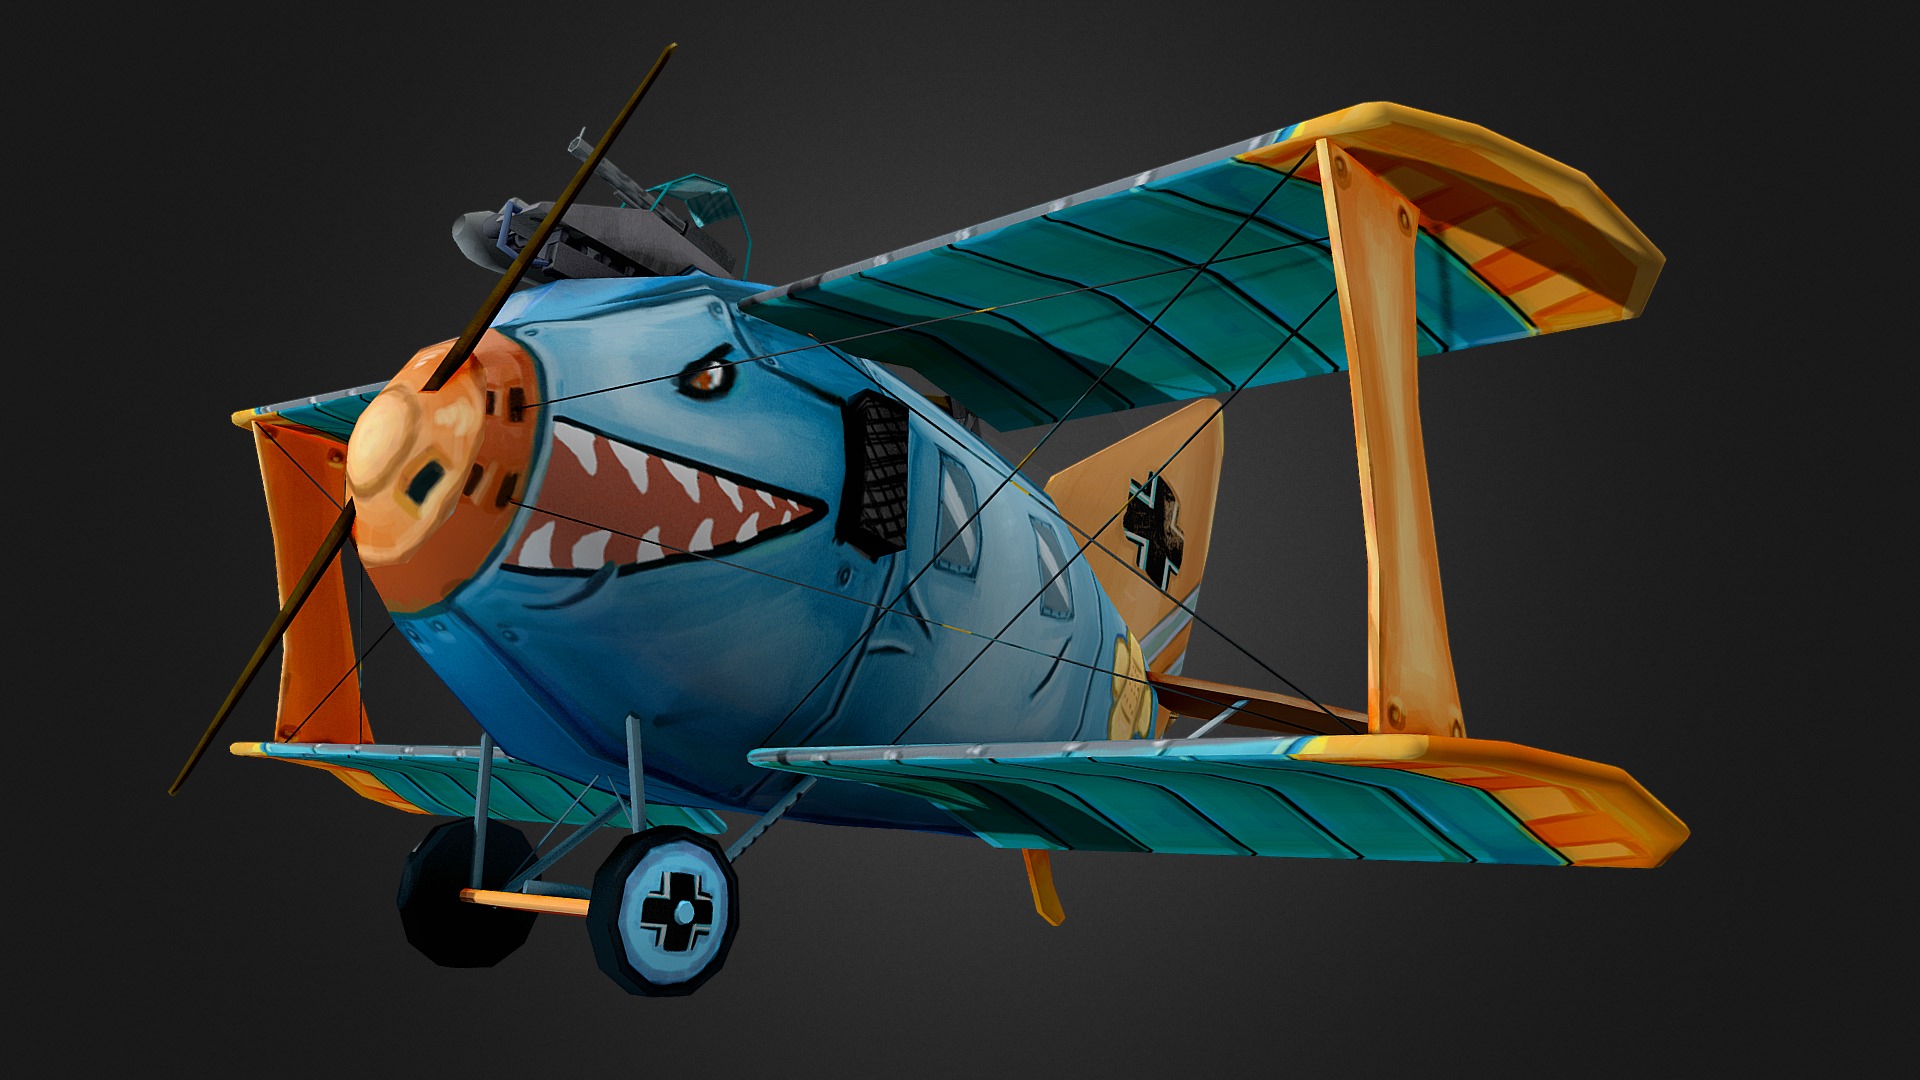 3D model Roland C.II WALFISH – GameArt - This is a 3D model of the Roland C.II WALFISH - GameArt. The 3D model is about a small airplane with a yellow and blue propeller.